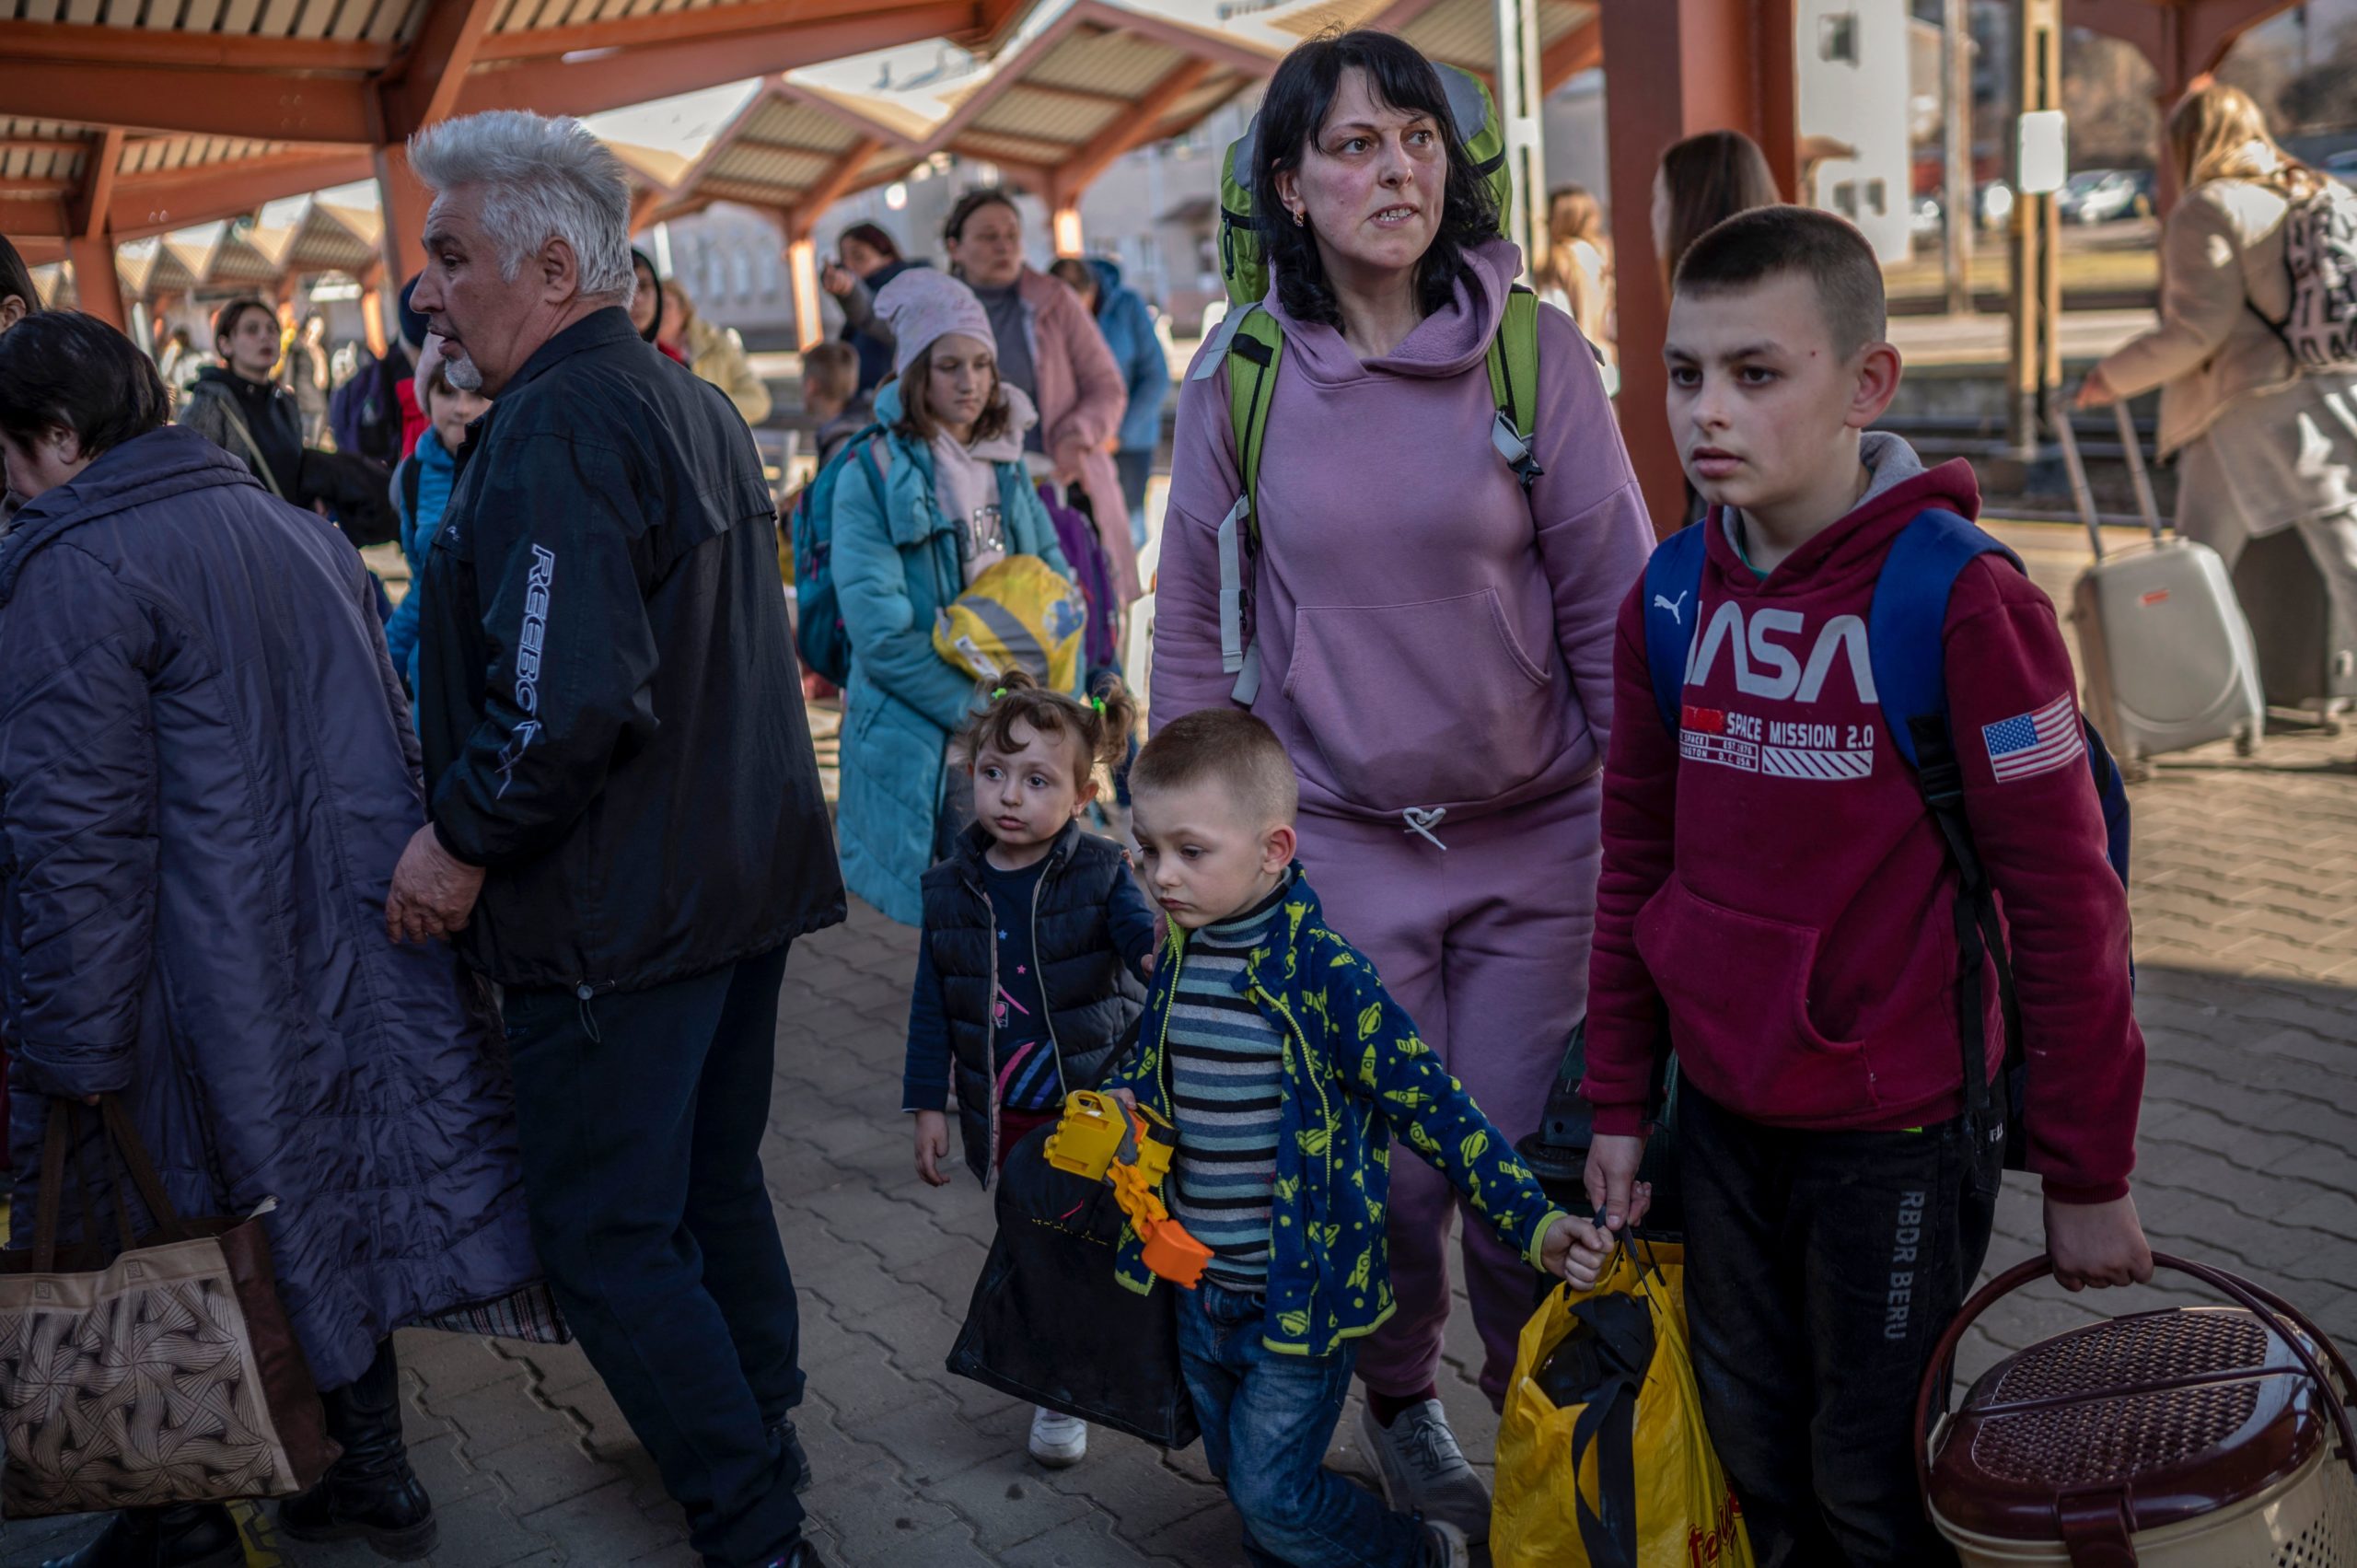 Ukrainian evacuees board a train to Warsaw at the rail station in Przemysl, near the Polish-Ukrainian border, on March 23, 2022, following Russia's military invasion launched on Ukraine. (Photo by Angelos Tzortzinis / AFP) (Photo by ANGELOS TZORTZINIS/AFP via Getty Images)